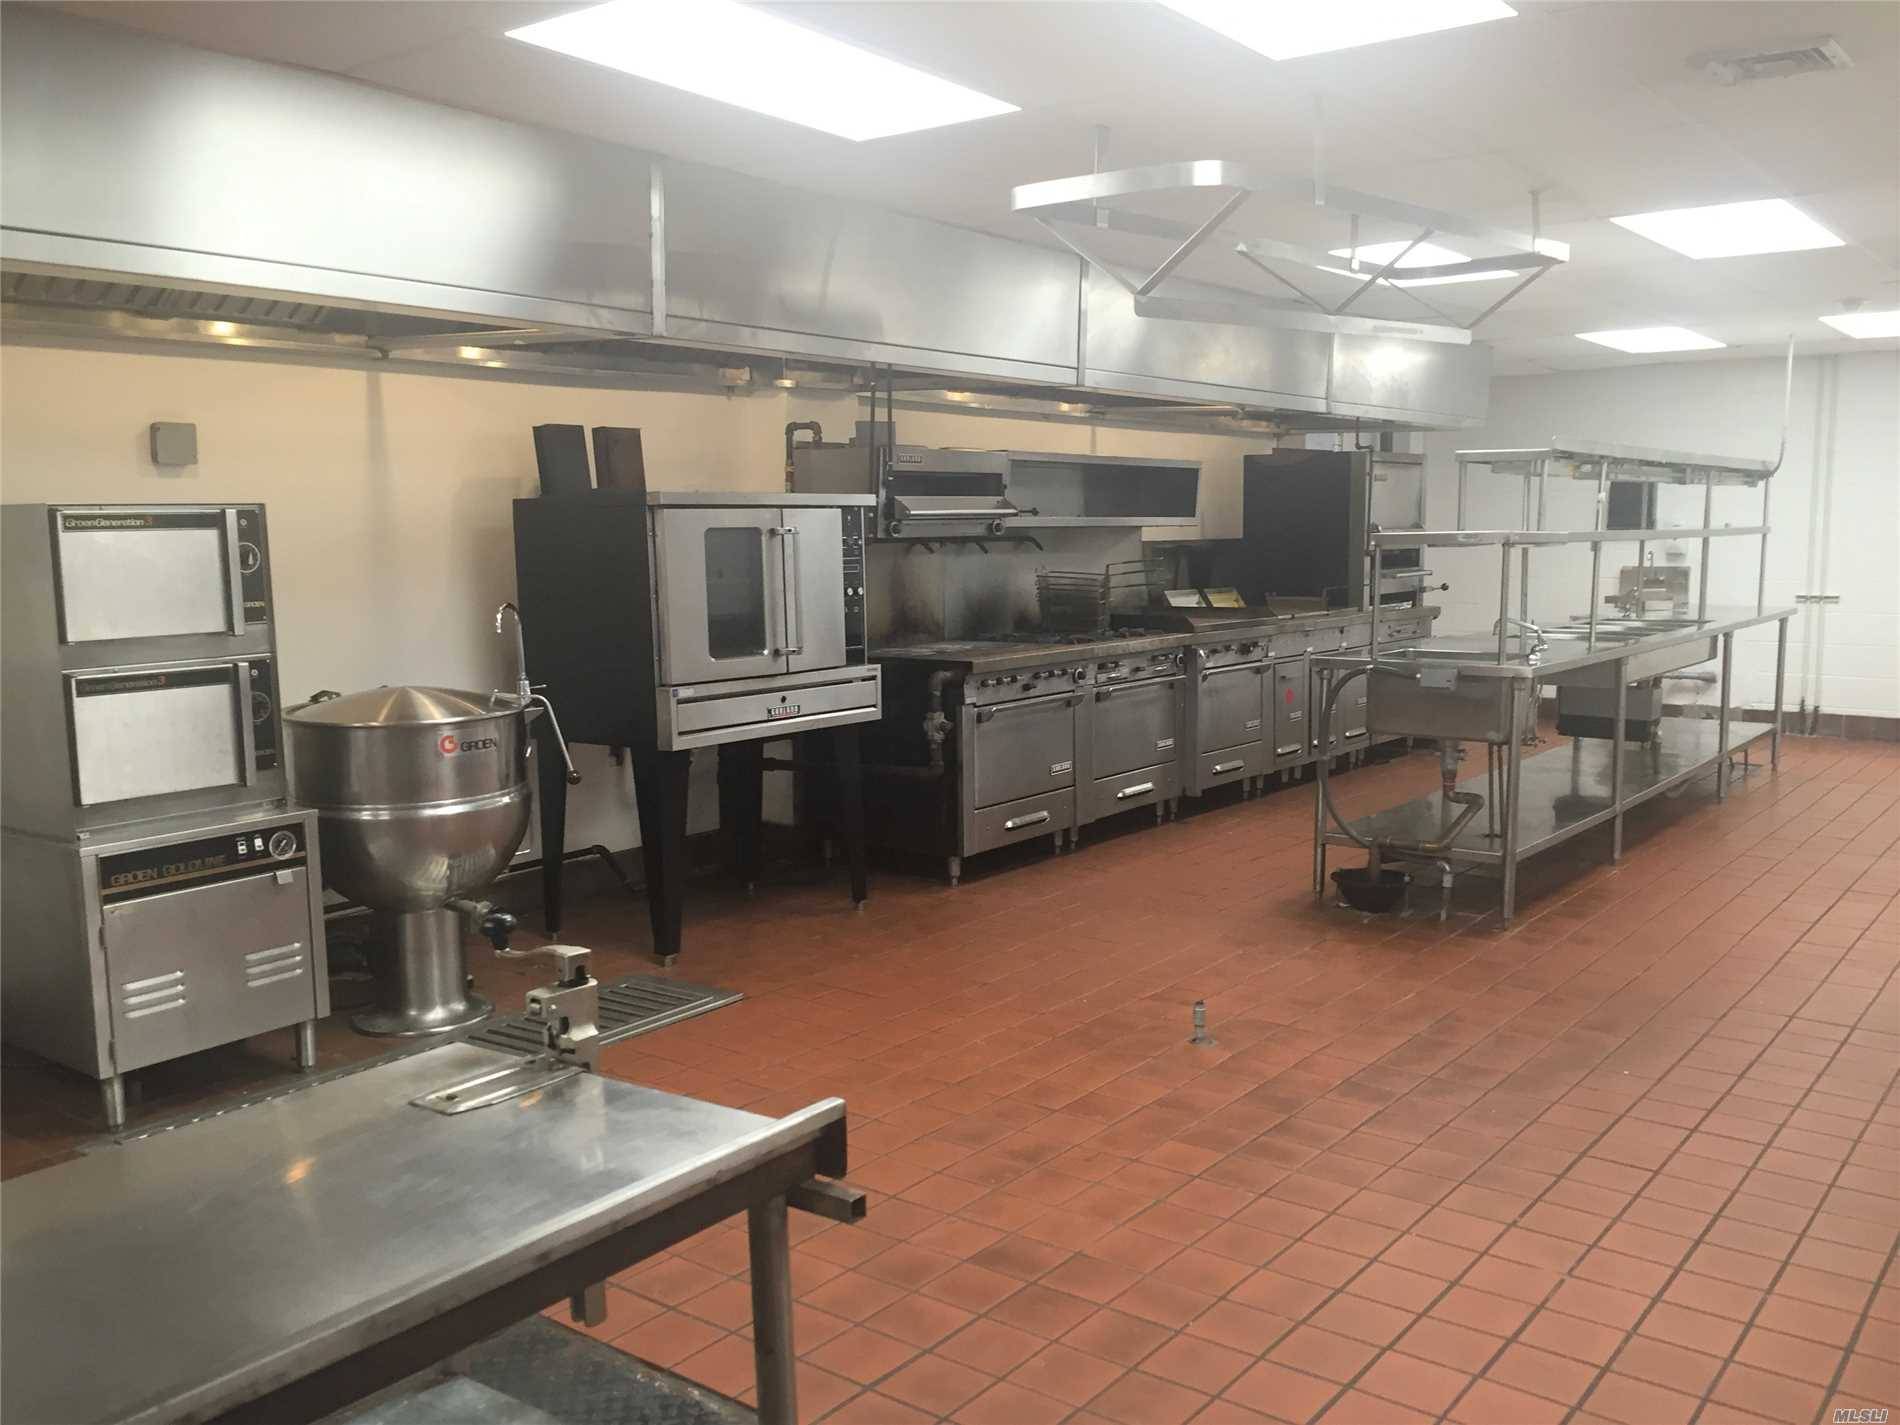 Syosset - Huge Private Commercial Kitchen In Lower Level Of Hotel.